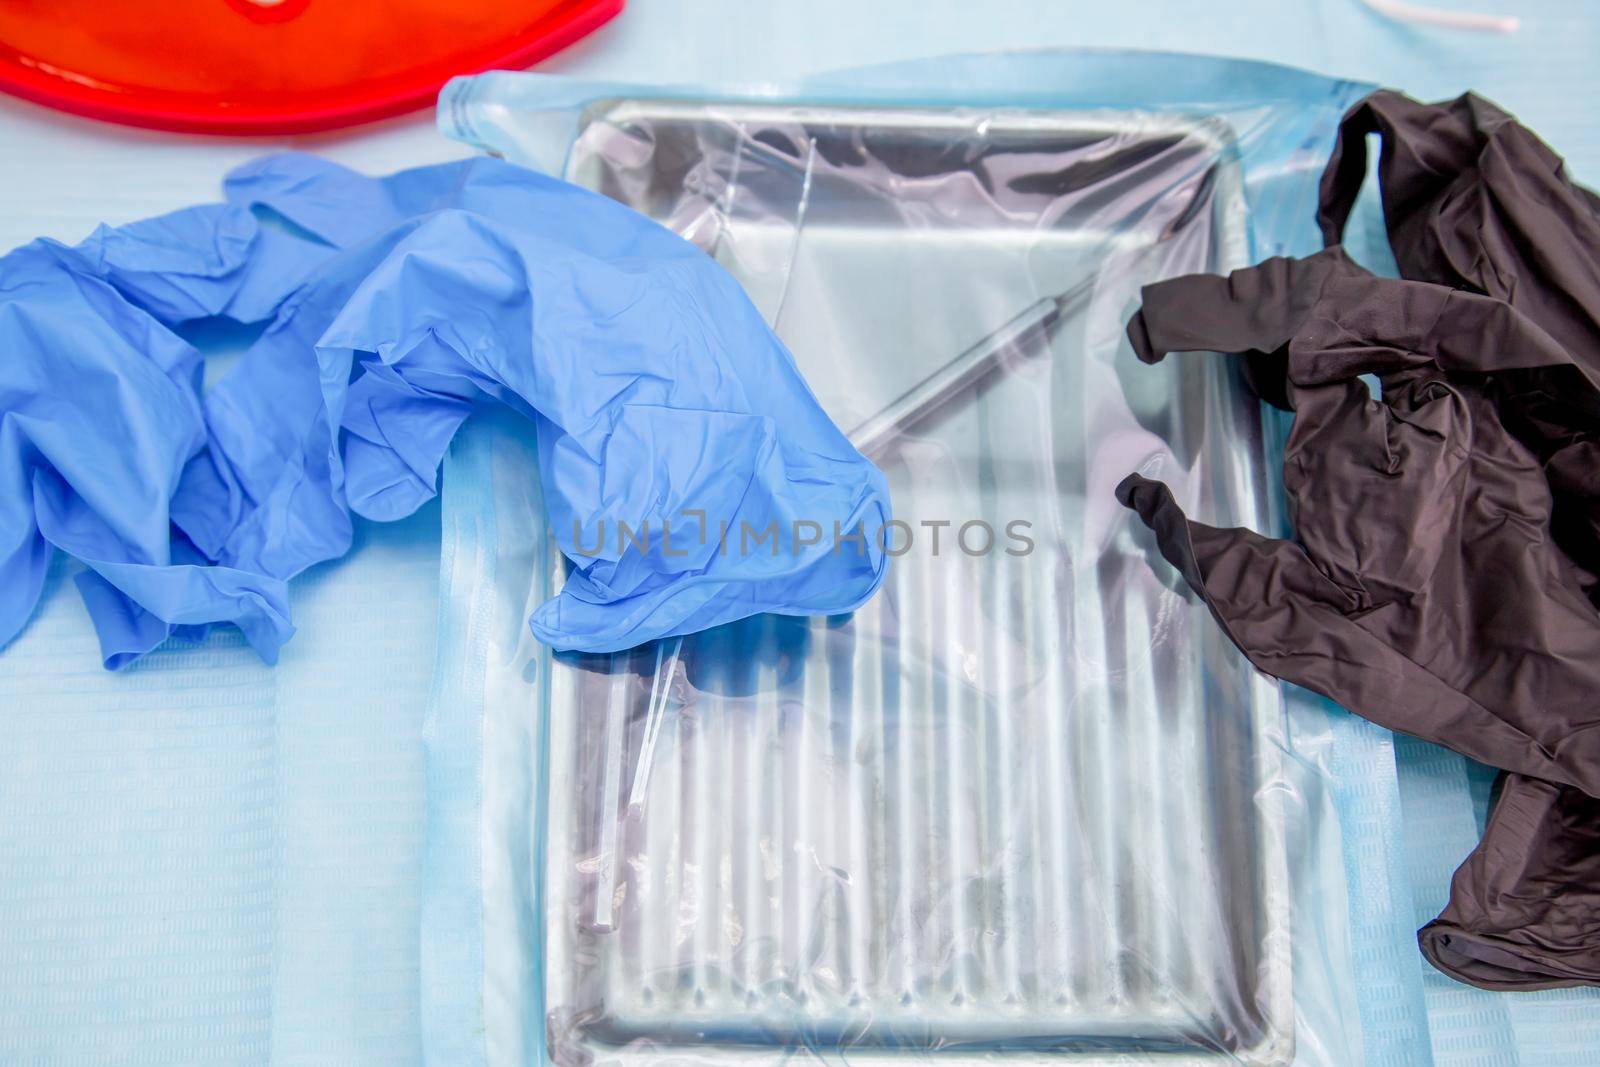 Sterile medical instruments in packaging and blue and black disposable gloves in a medical office. Surgical and dentistry equipment on the table.